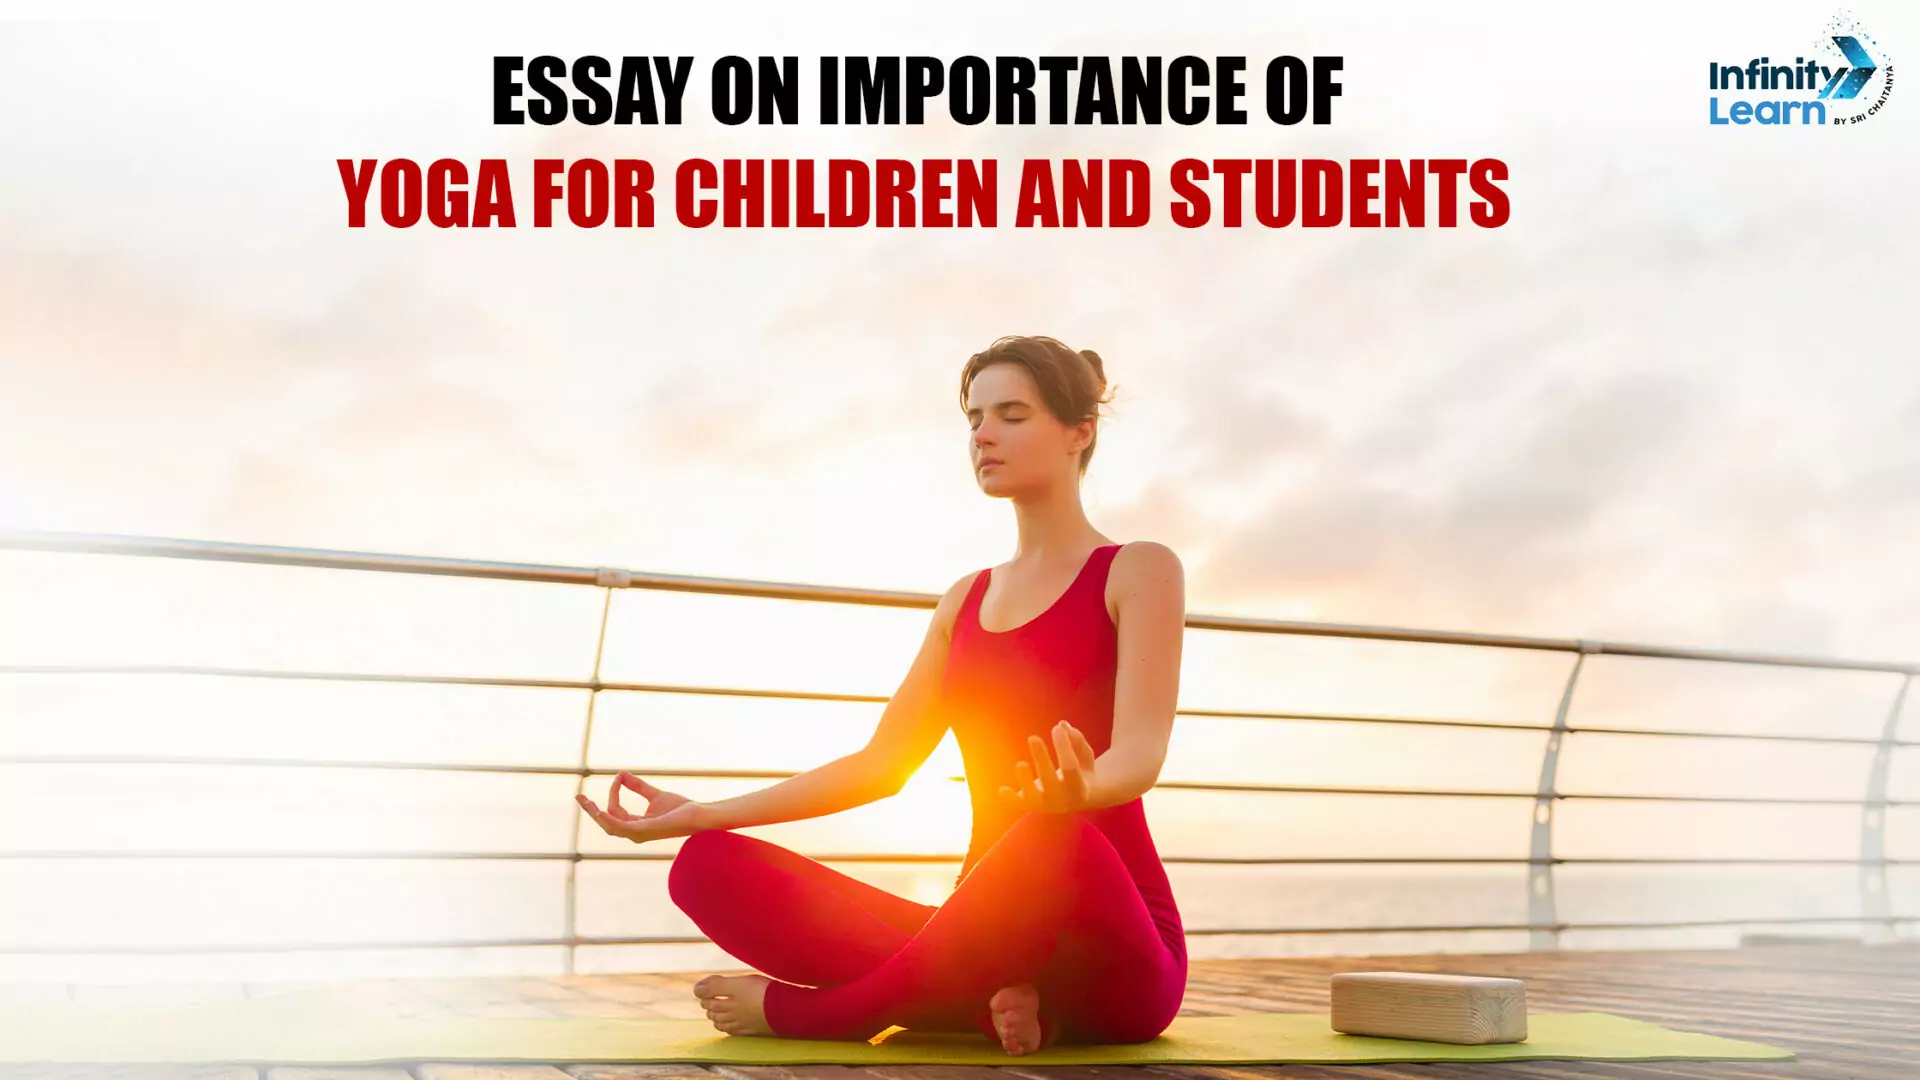 Essay on Importance of Yoga for Children and Students